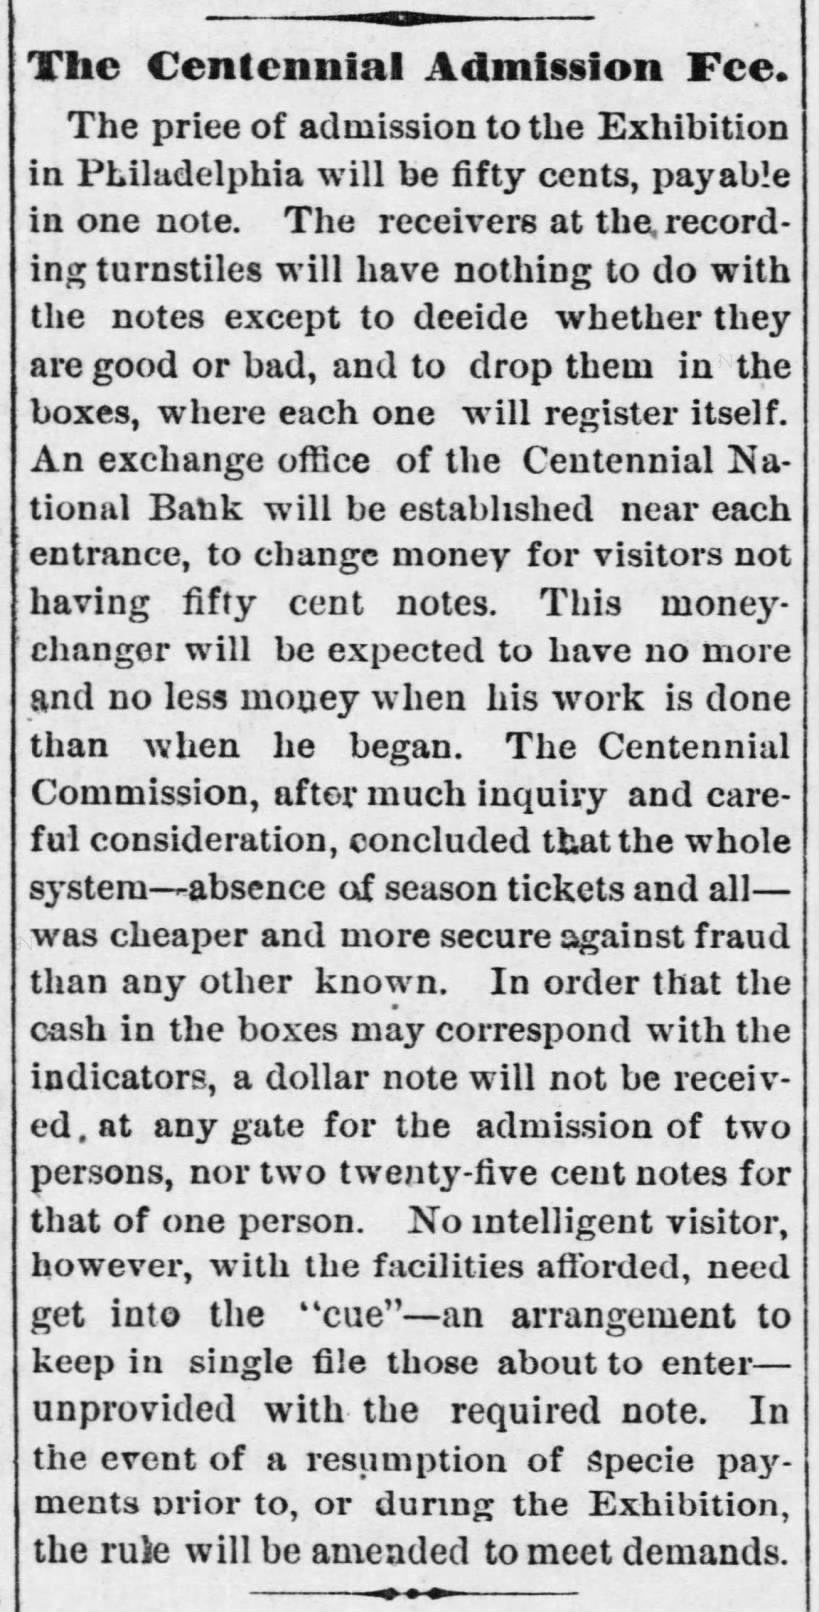 The Centennial Admission Fee 3-29-1876